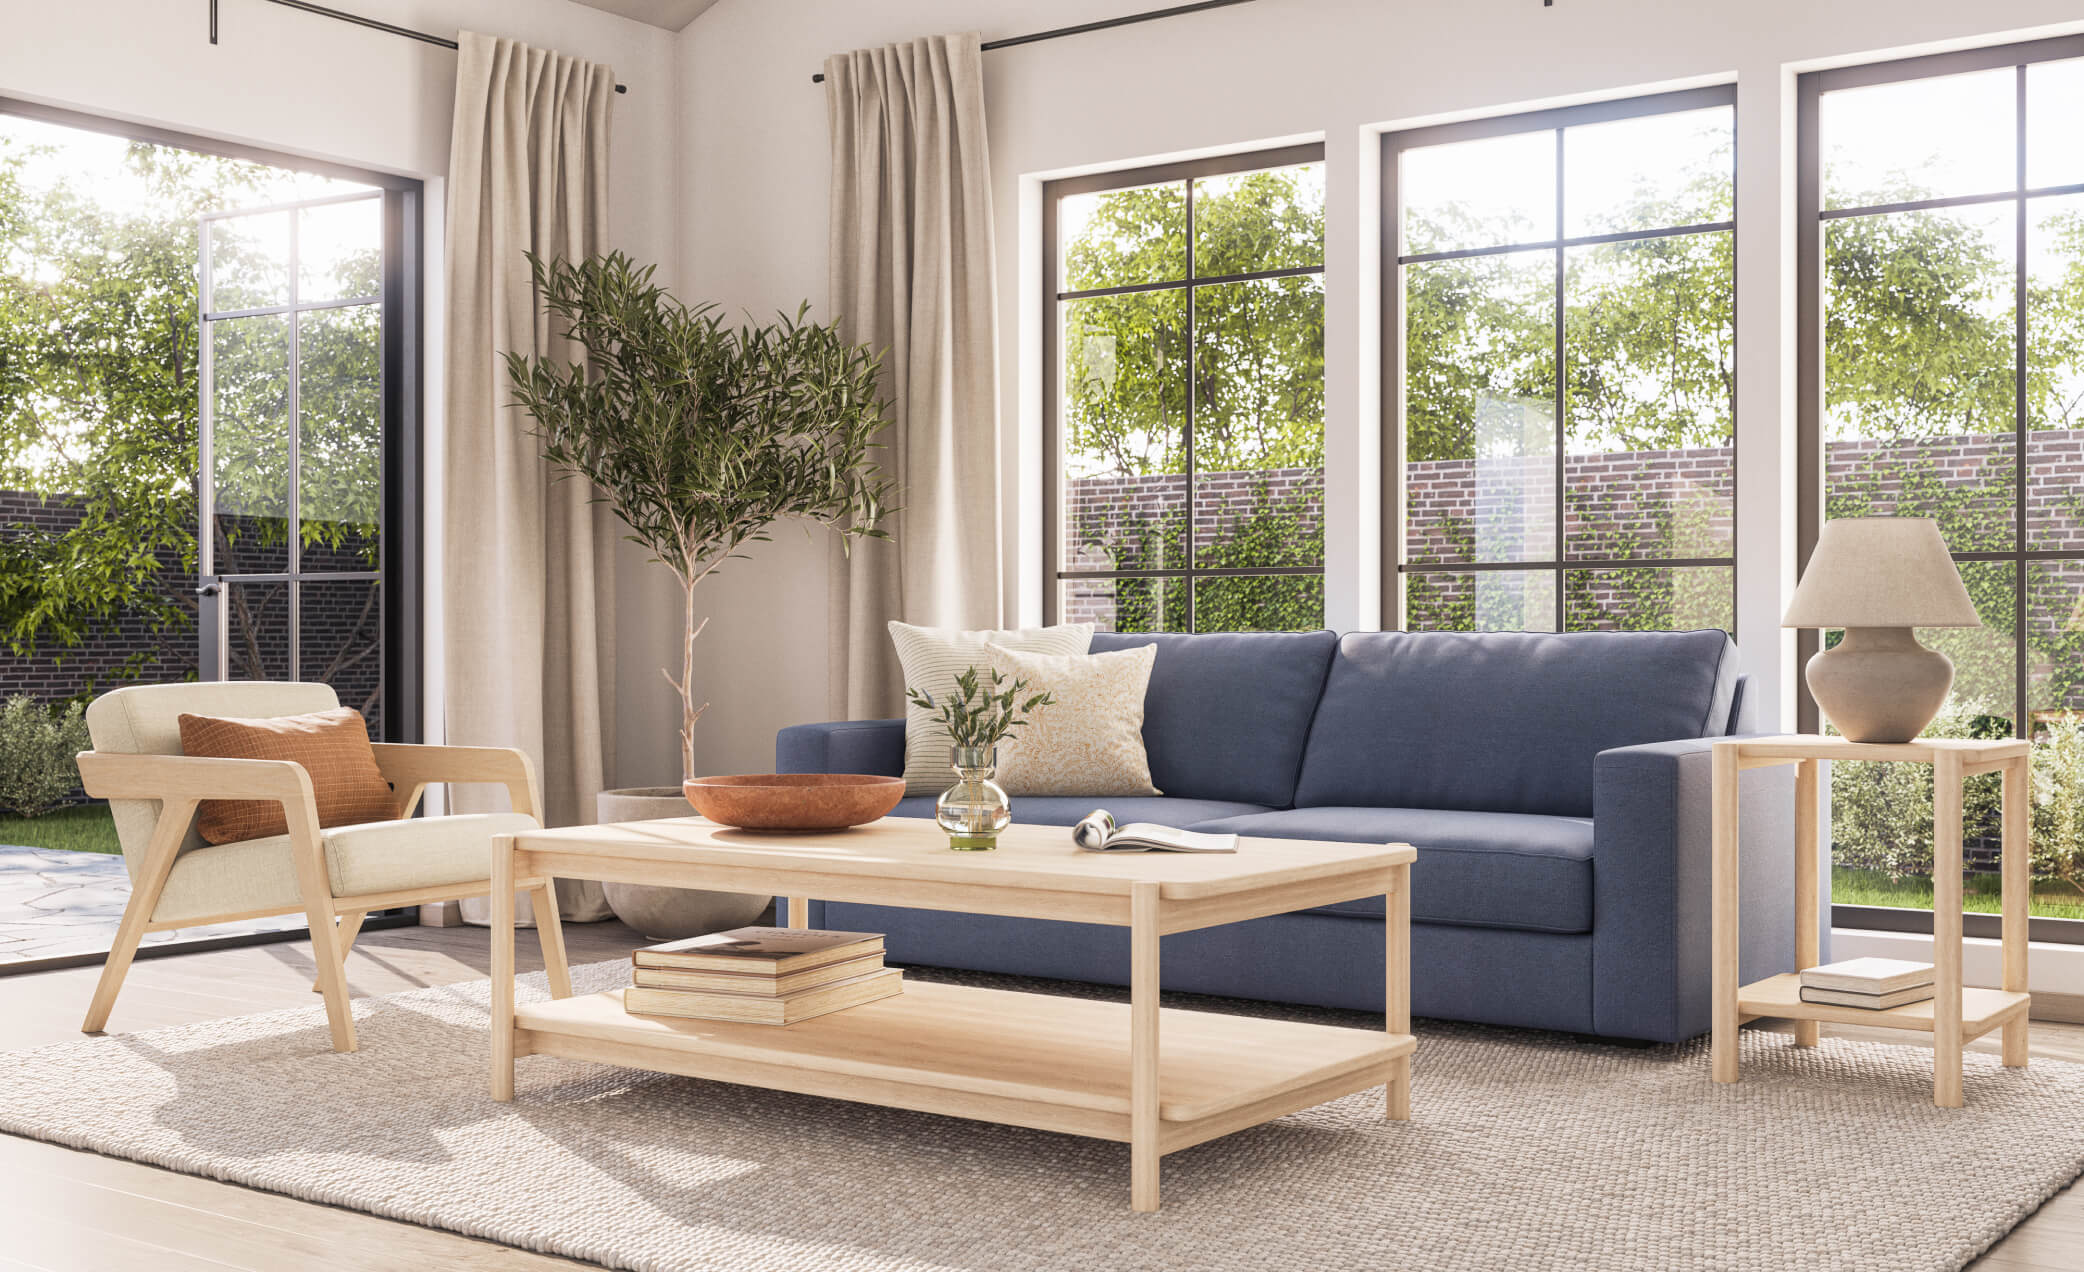 IRL: Shown in Maple wood and Deluxe Nougat fabric, shown with Iris Rectangular Coffee Table in Maple with Rio Sofa in Texture French Blue fabric